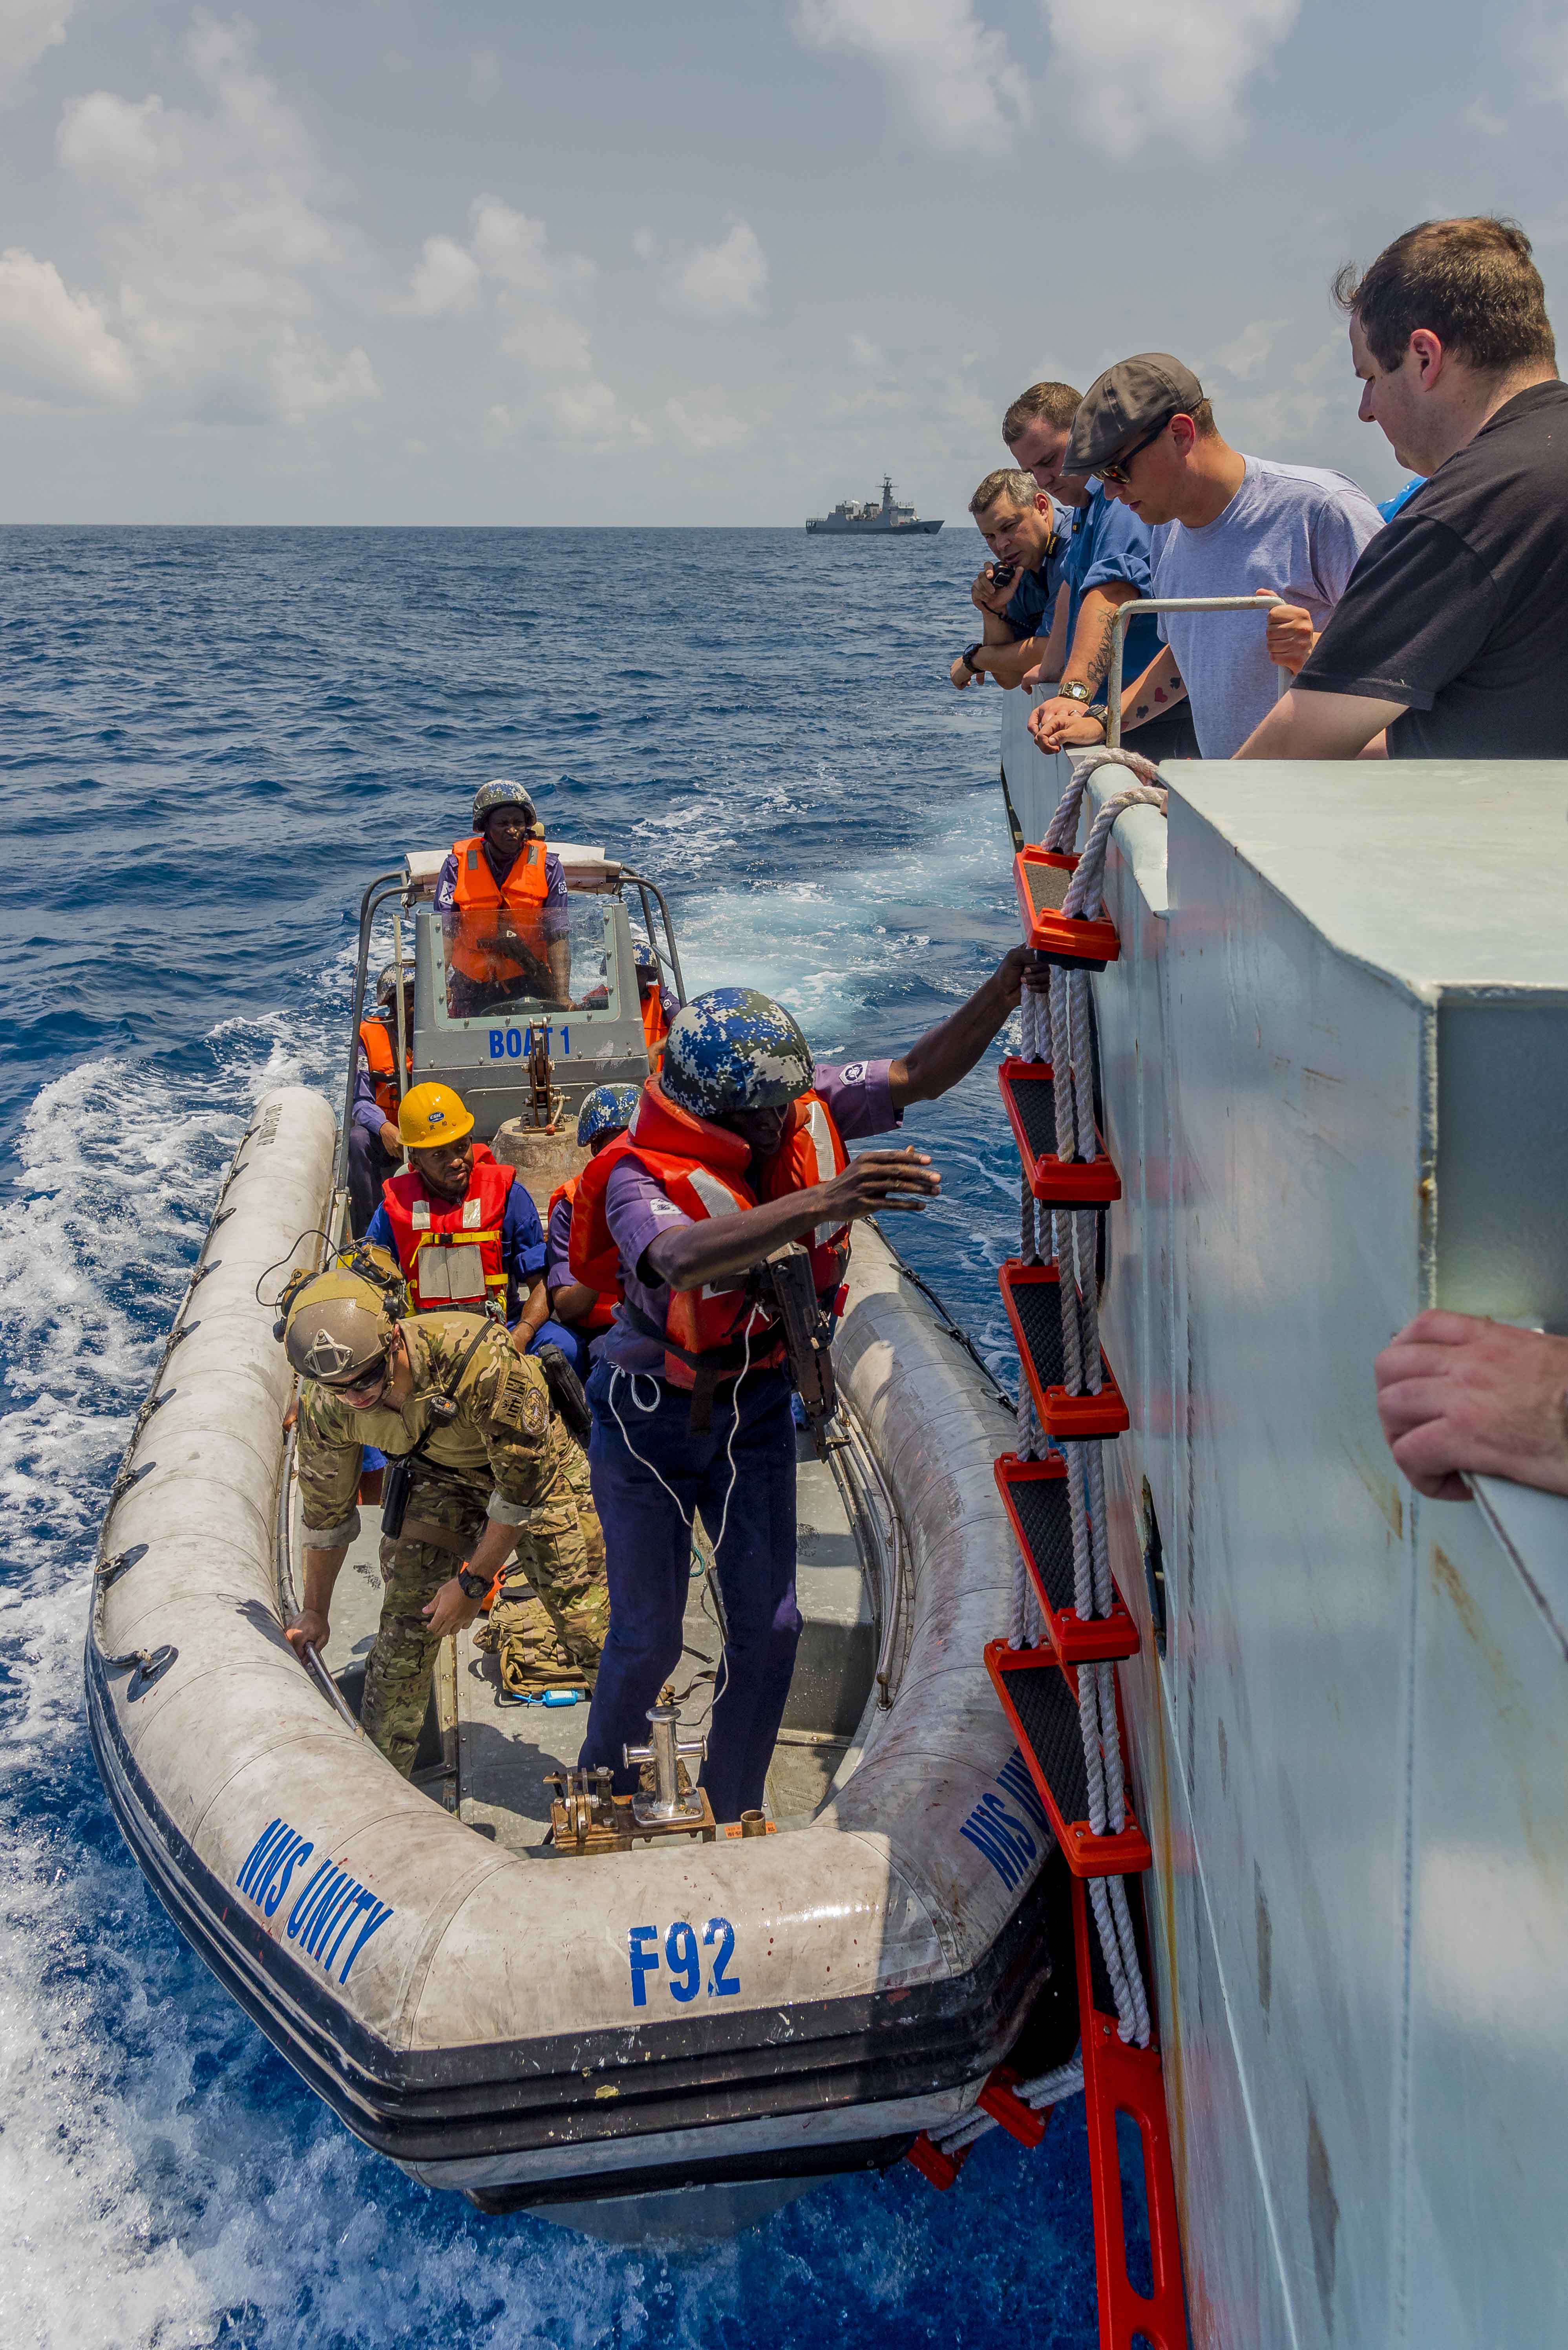 March 12, 2018. Members of the Nigerian Navy and United States Coast Guard (USCG) board Her Majesty's Canadian Ship (HMCS) KINGSTON from a rigid hulled inflatable boat (RHIB) as part of a training exercise during Operation PROJECTION west Africa off the coast of the port city of Lagos, Nigeria, March 12, 2018. Photo: Ordinary Seaman (OS) John Iglesias Formation Imaging Services